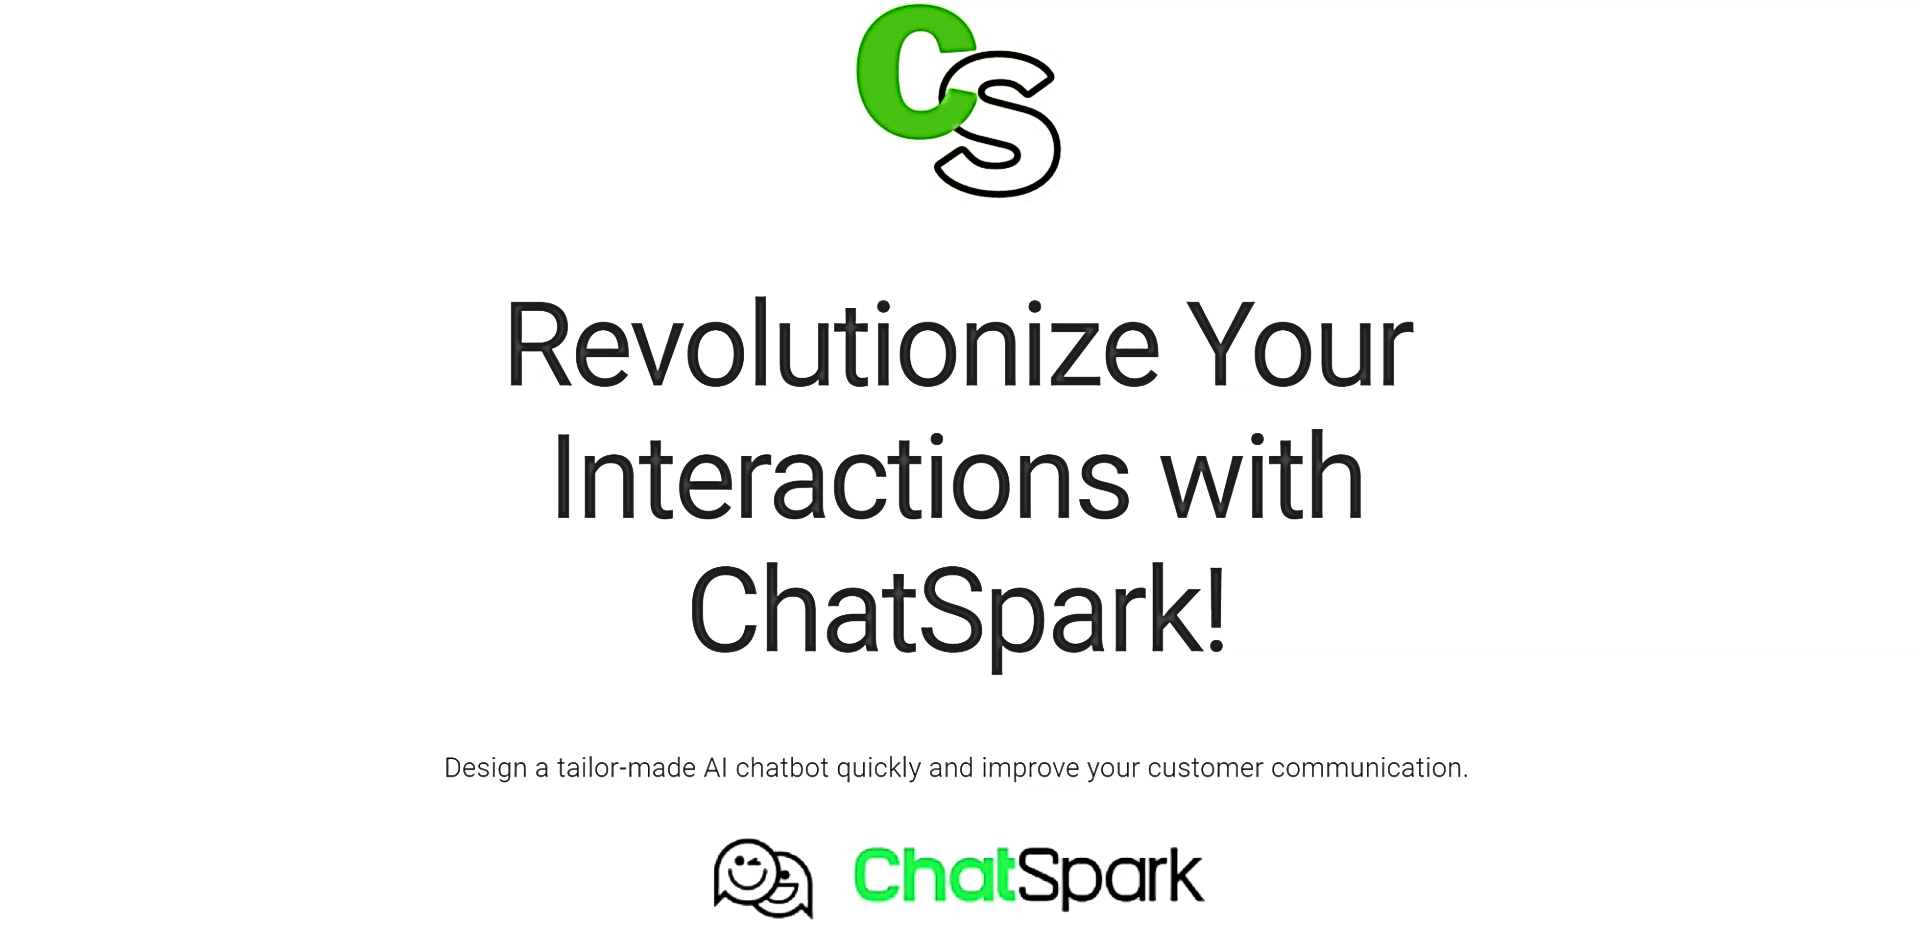 ChatSpark featured